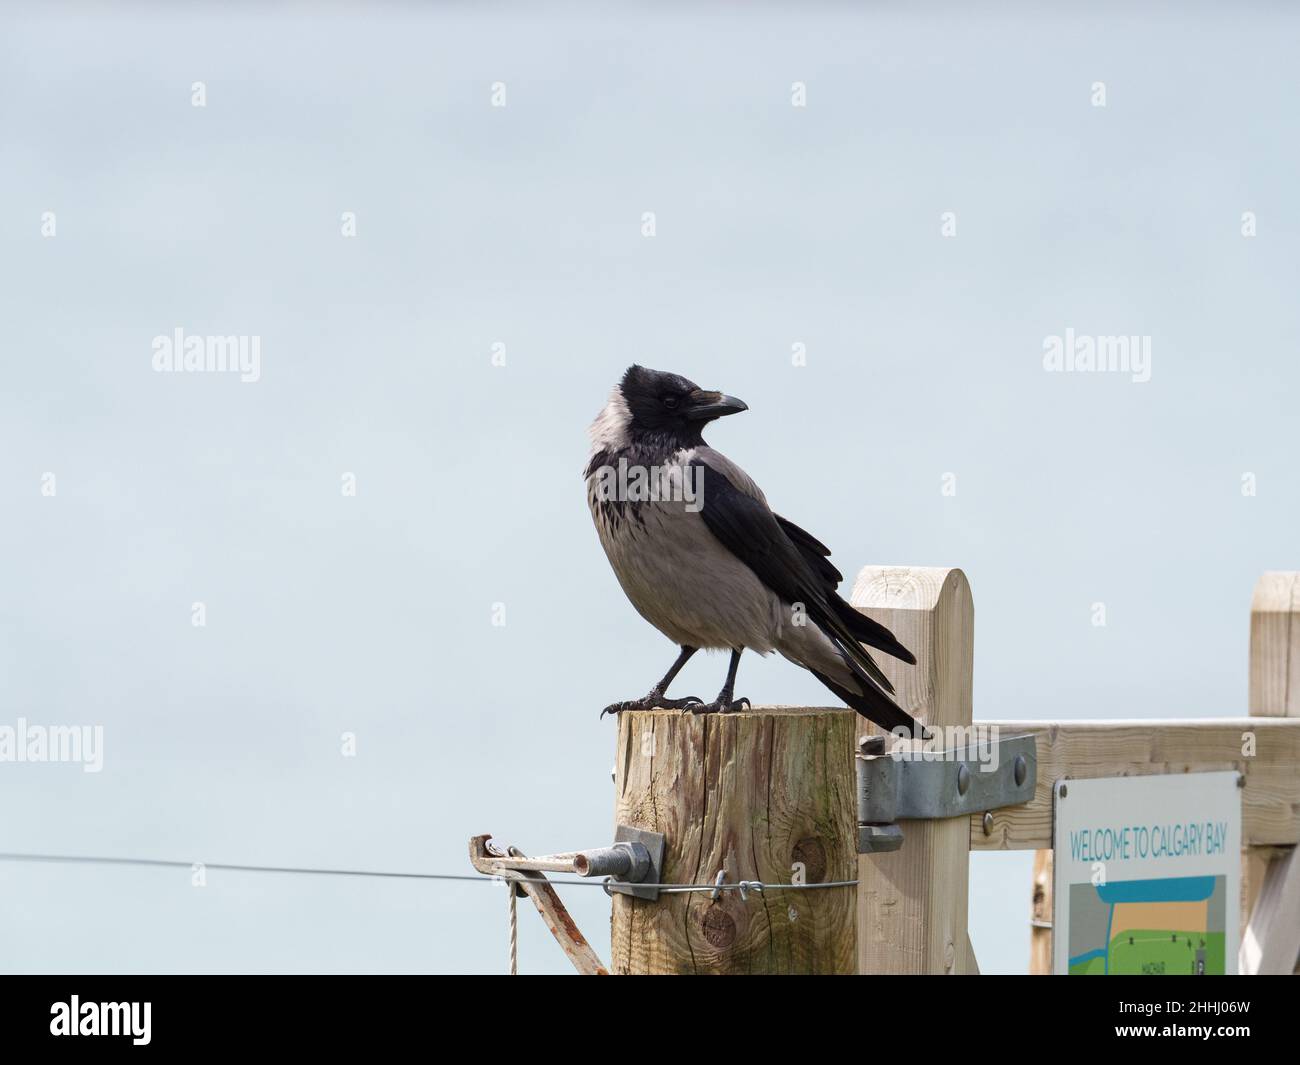 Hooded crow Corvus corone cornix on a fence post at picnic area overlooking Calgary Bay, Isle of Mull, Inner Hebrides, Argyll and Bute, Scotland, UK, Stock Photo